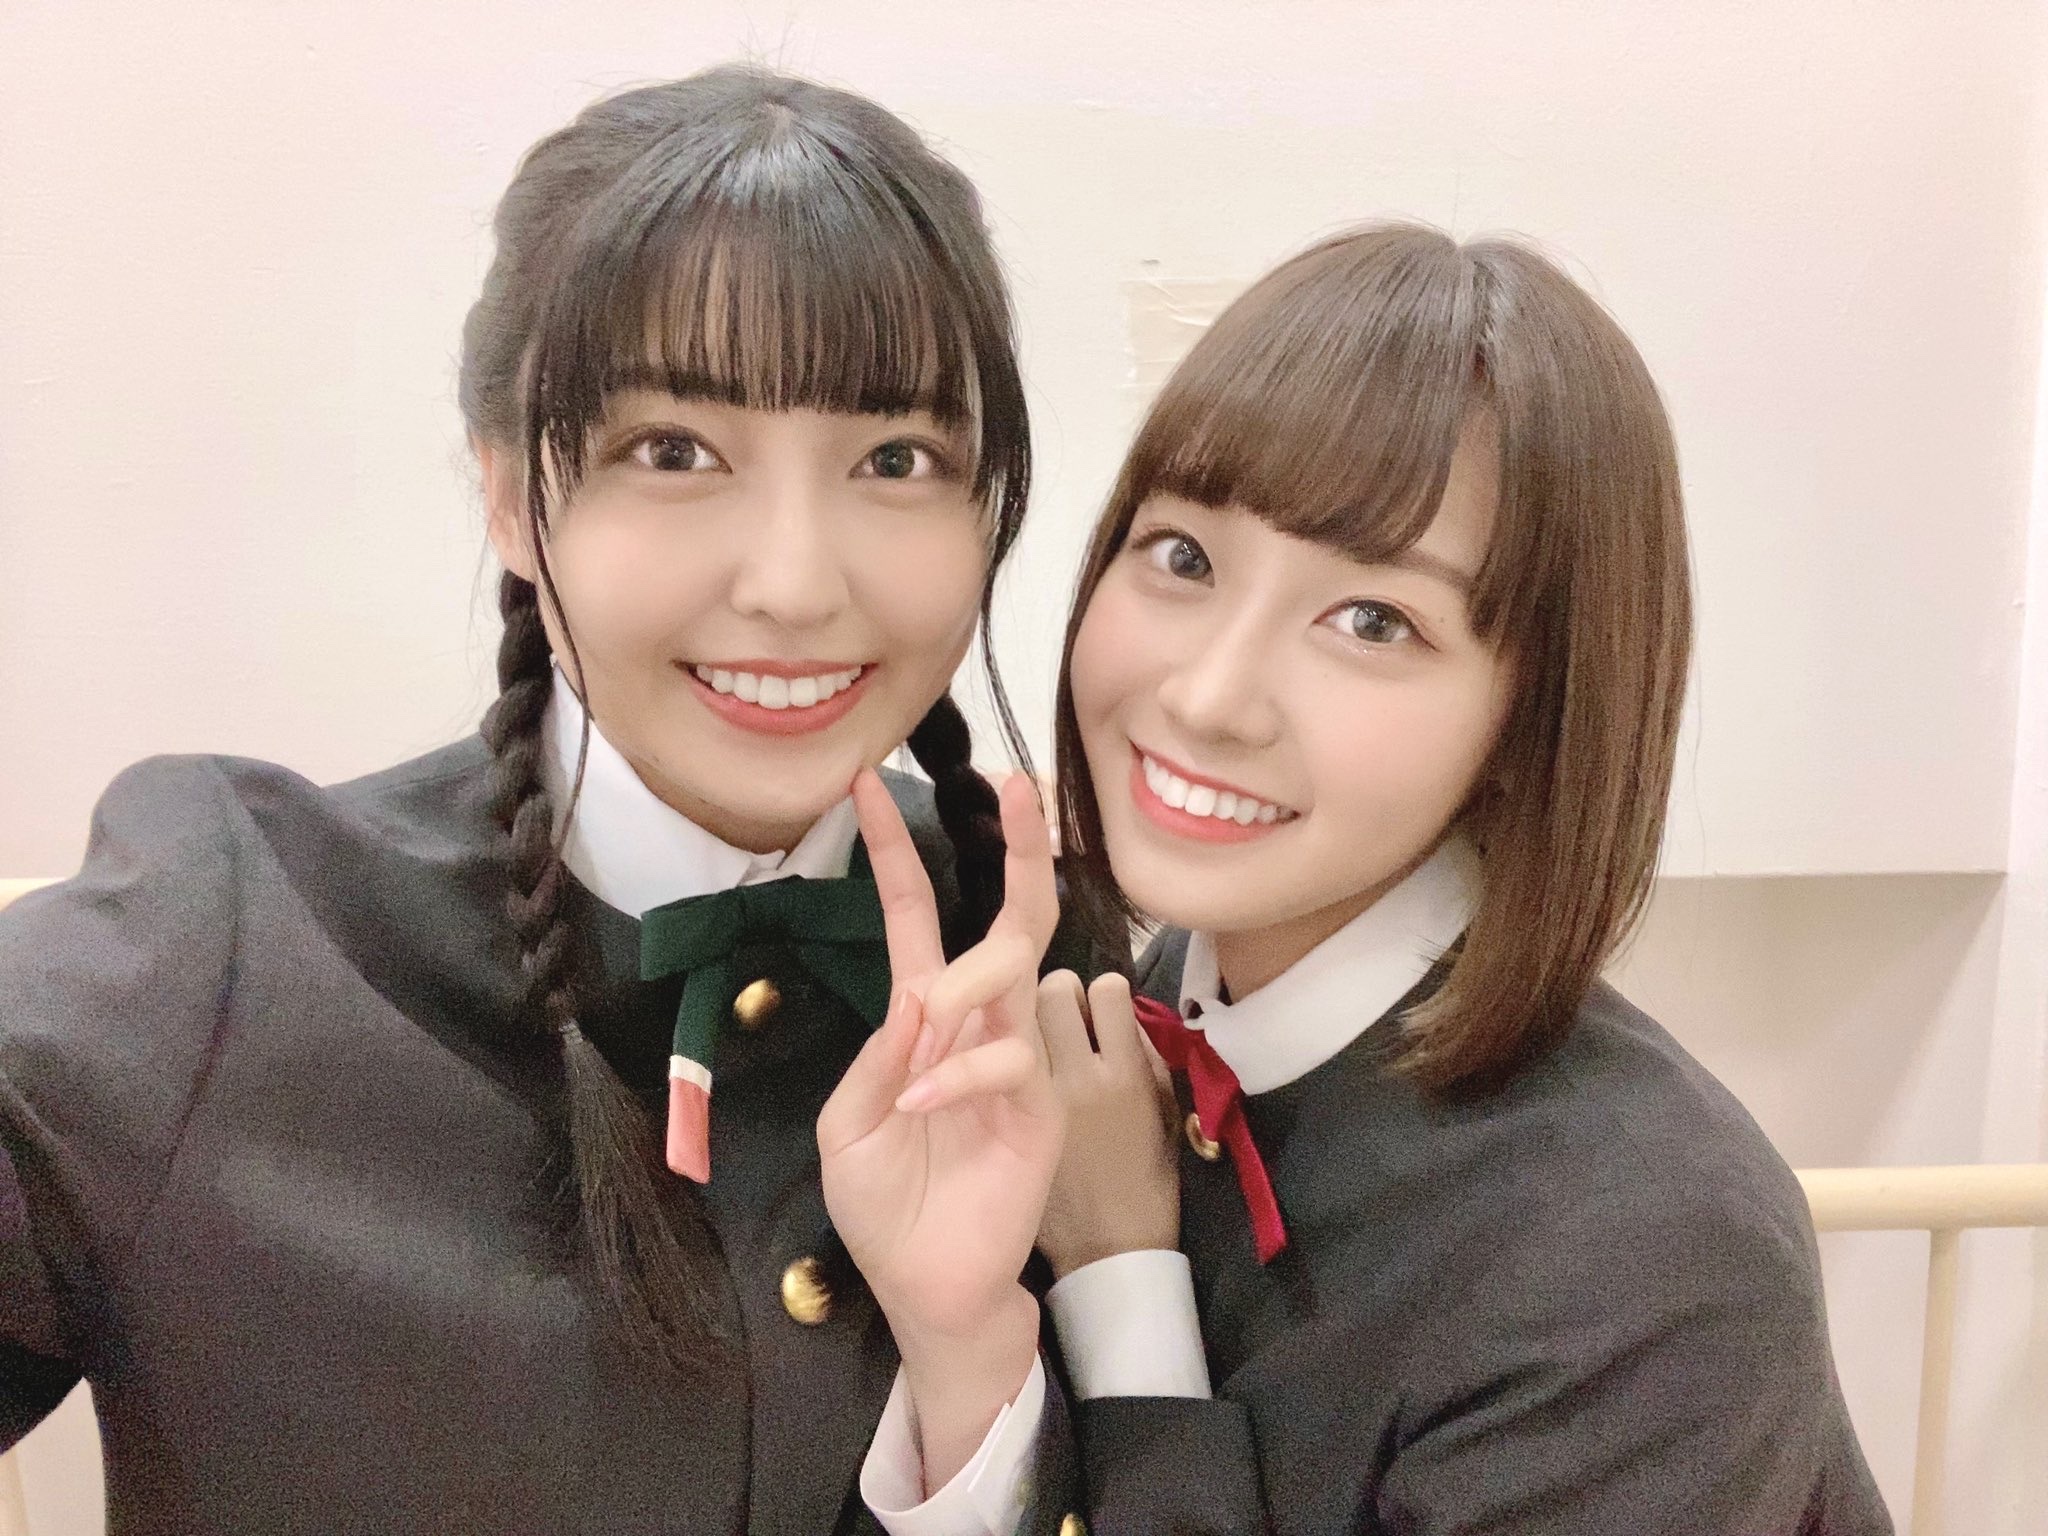 %title%指出毬亜さんと楠木ともりさん、デート